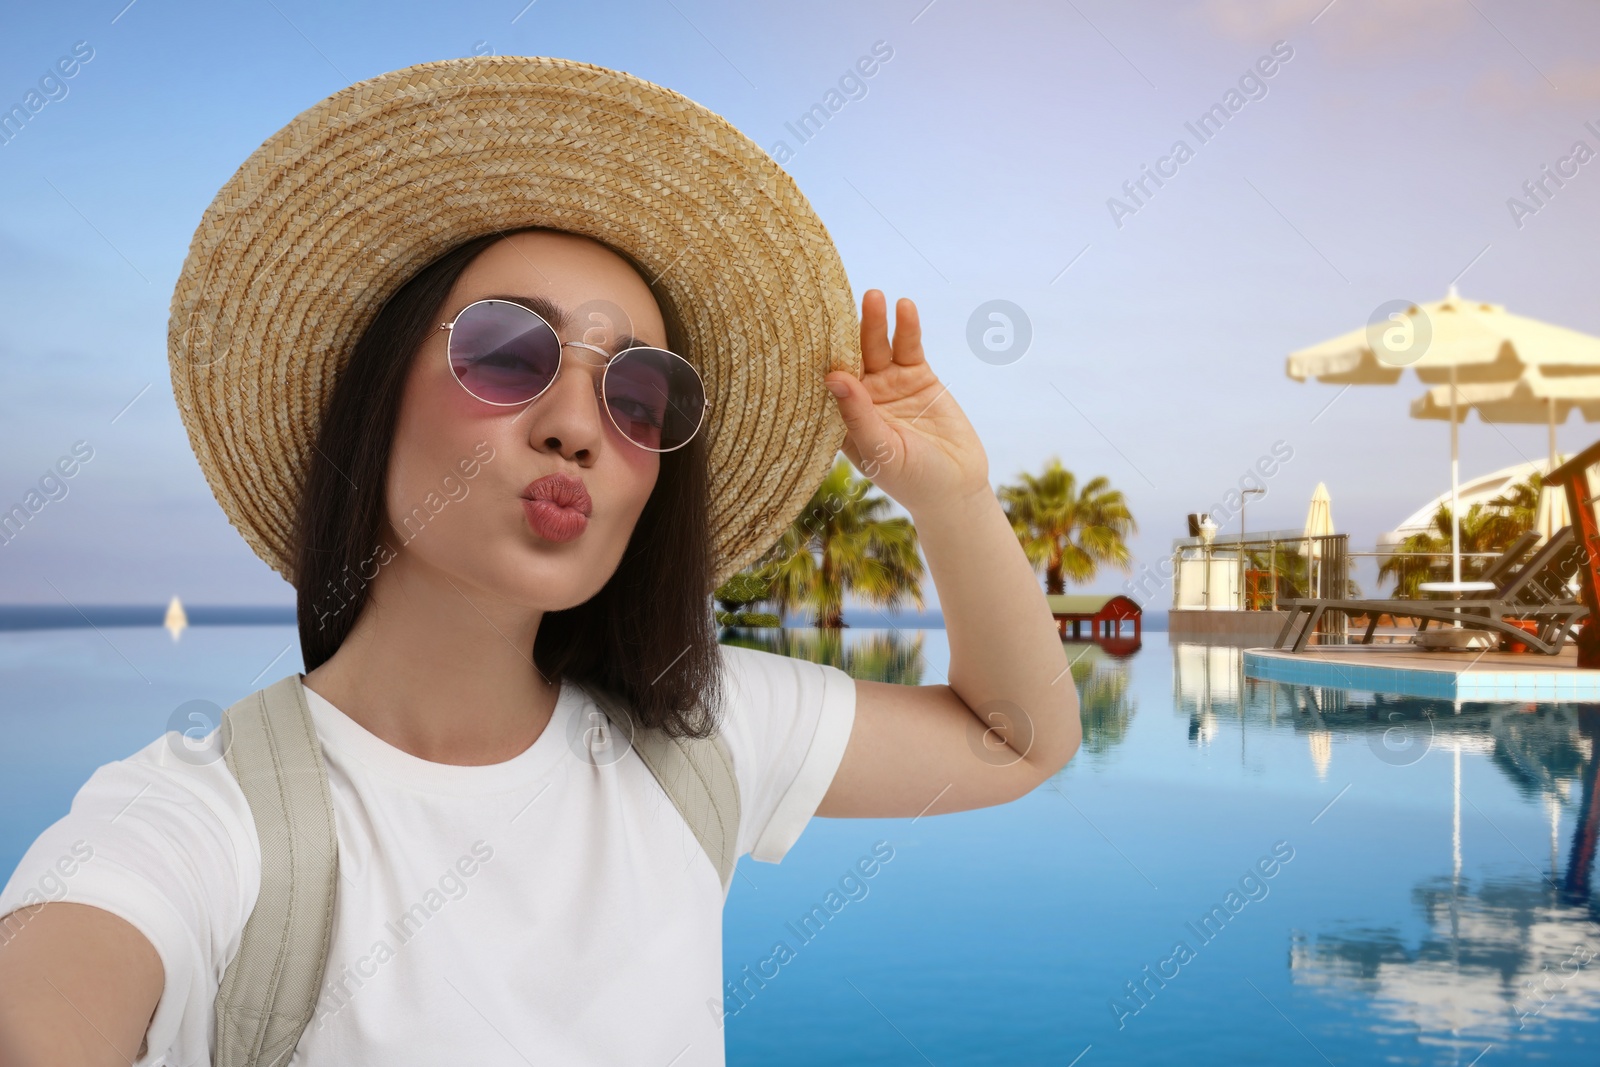 Image of Smiling young woman in sunglasses and straw hat taking selfie at resort